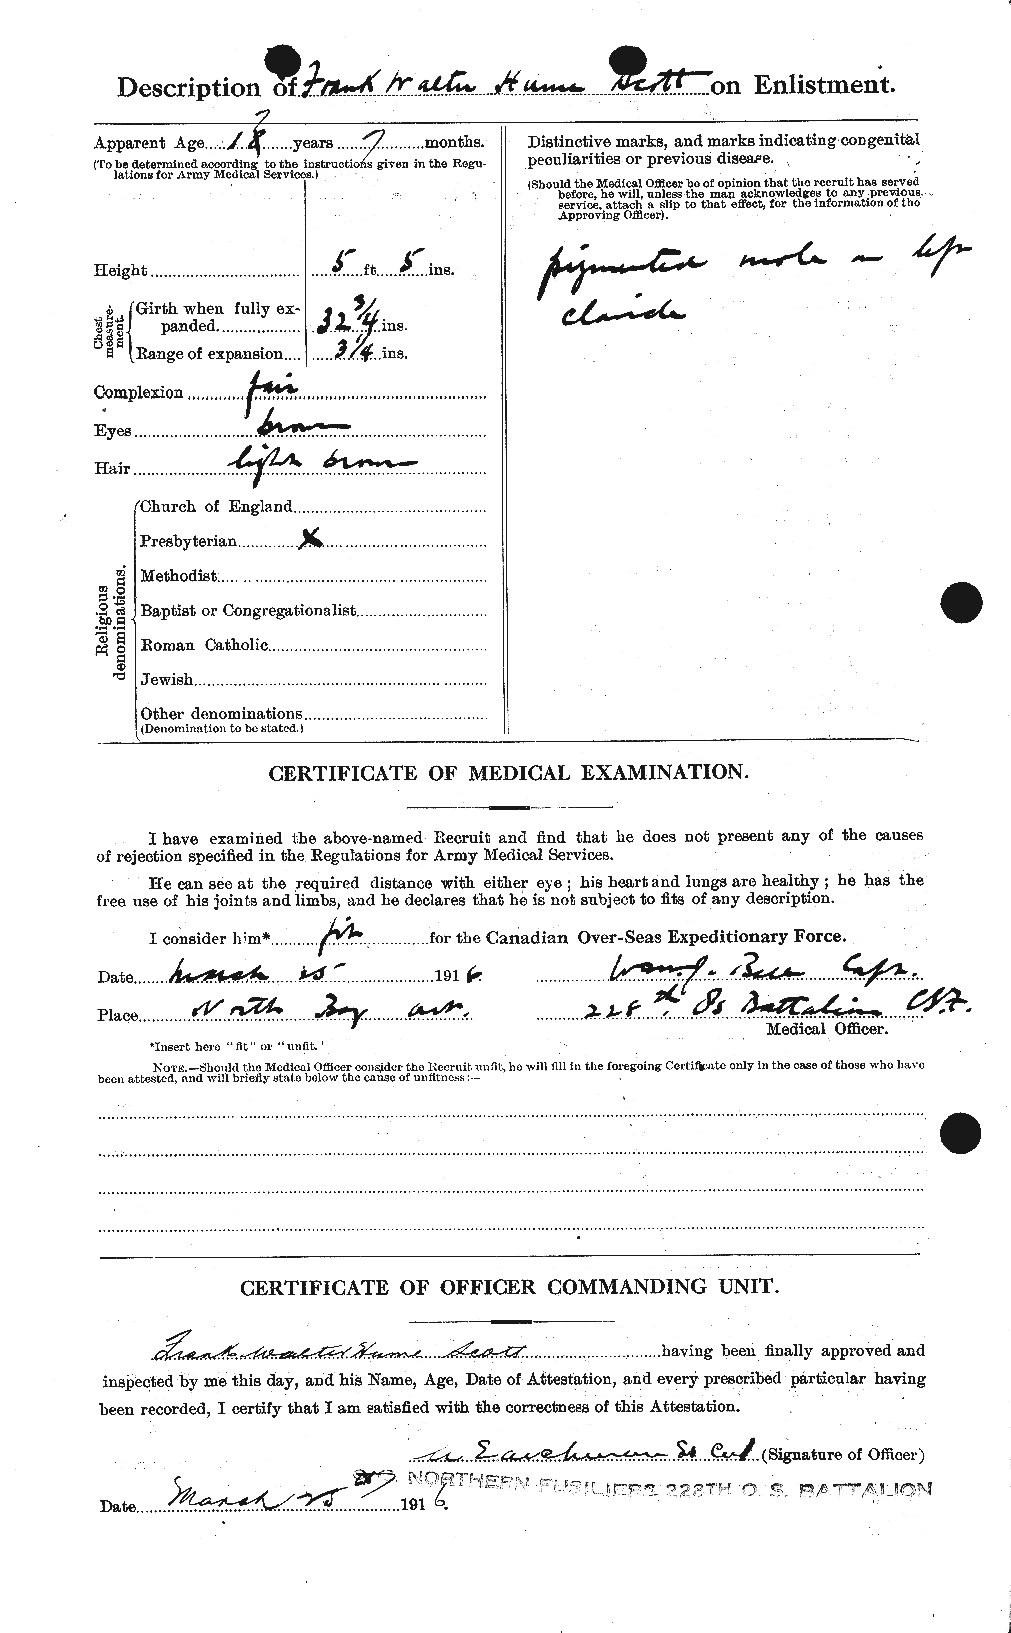 Personnel Records of the First World War - CEF 084689b